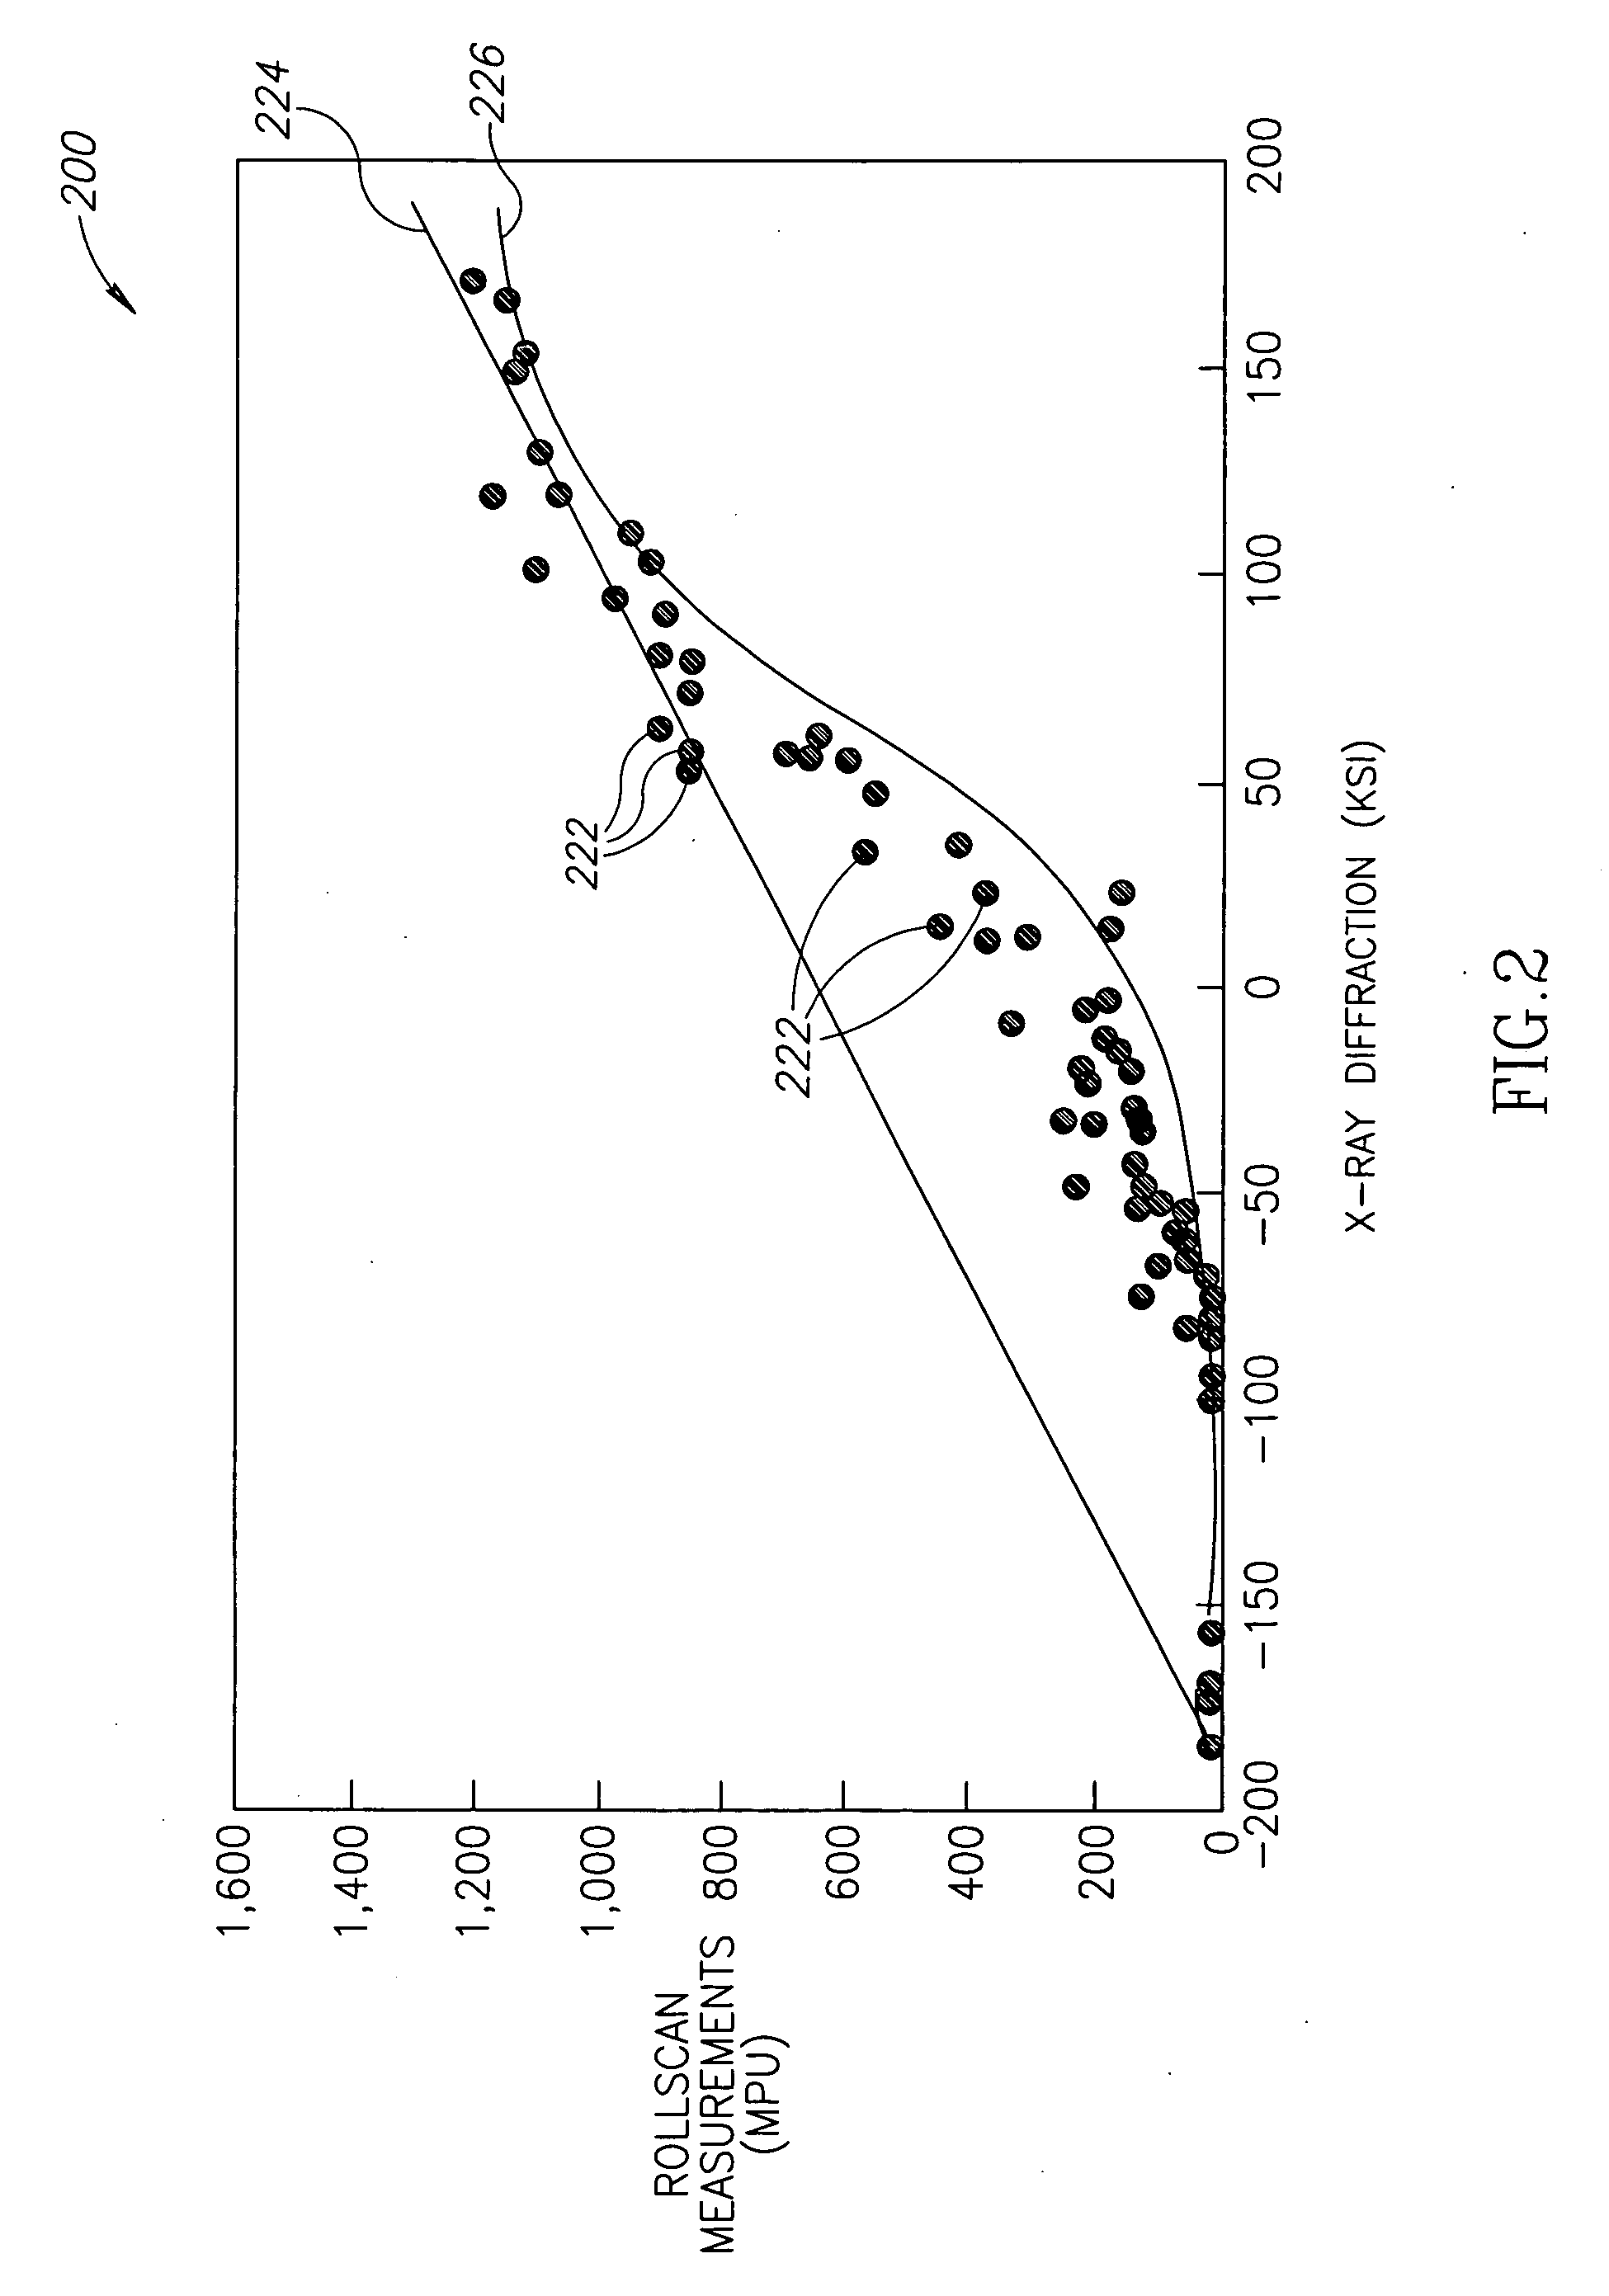 Systems and methods of measuring residual stress in metallic materials